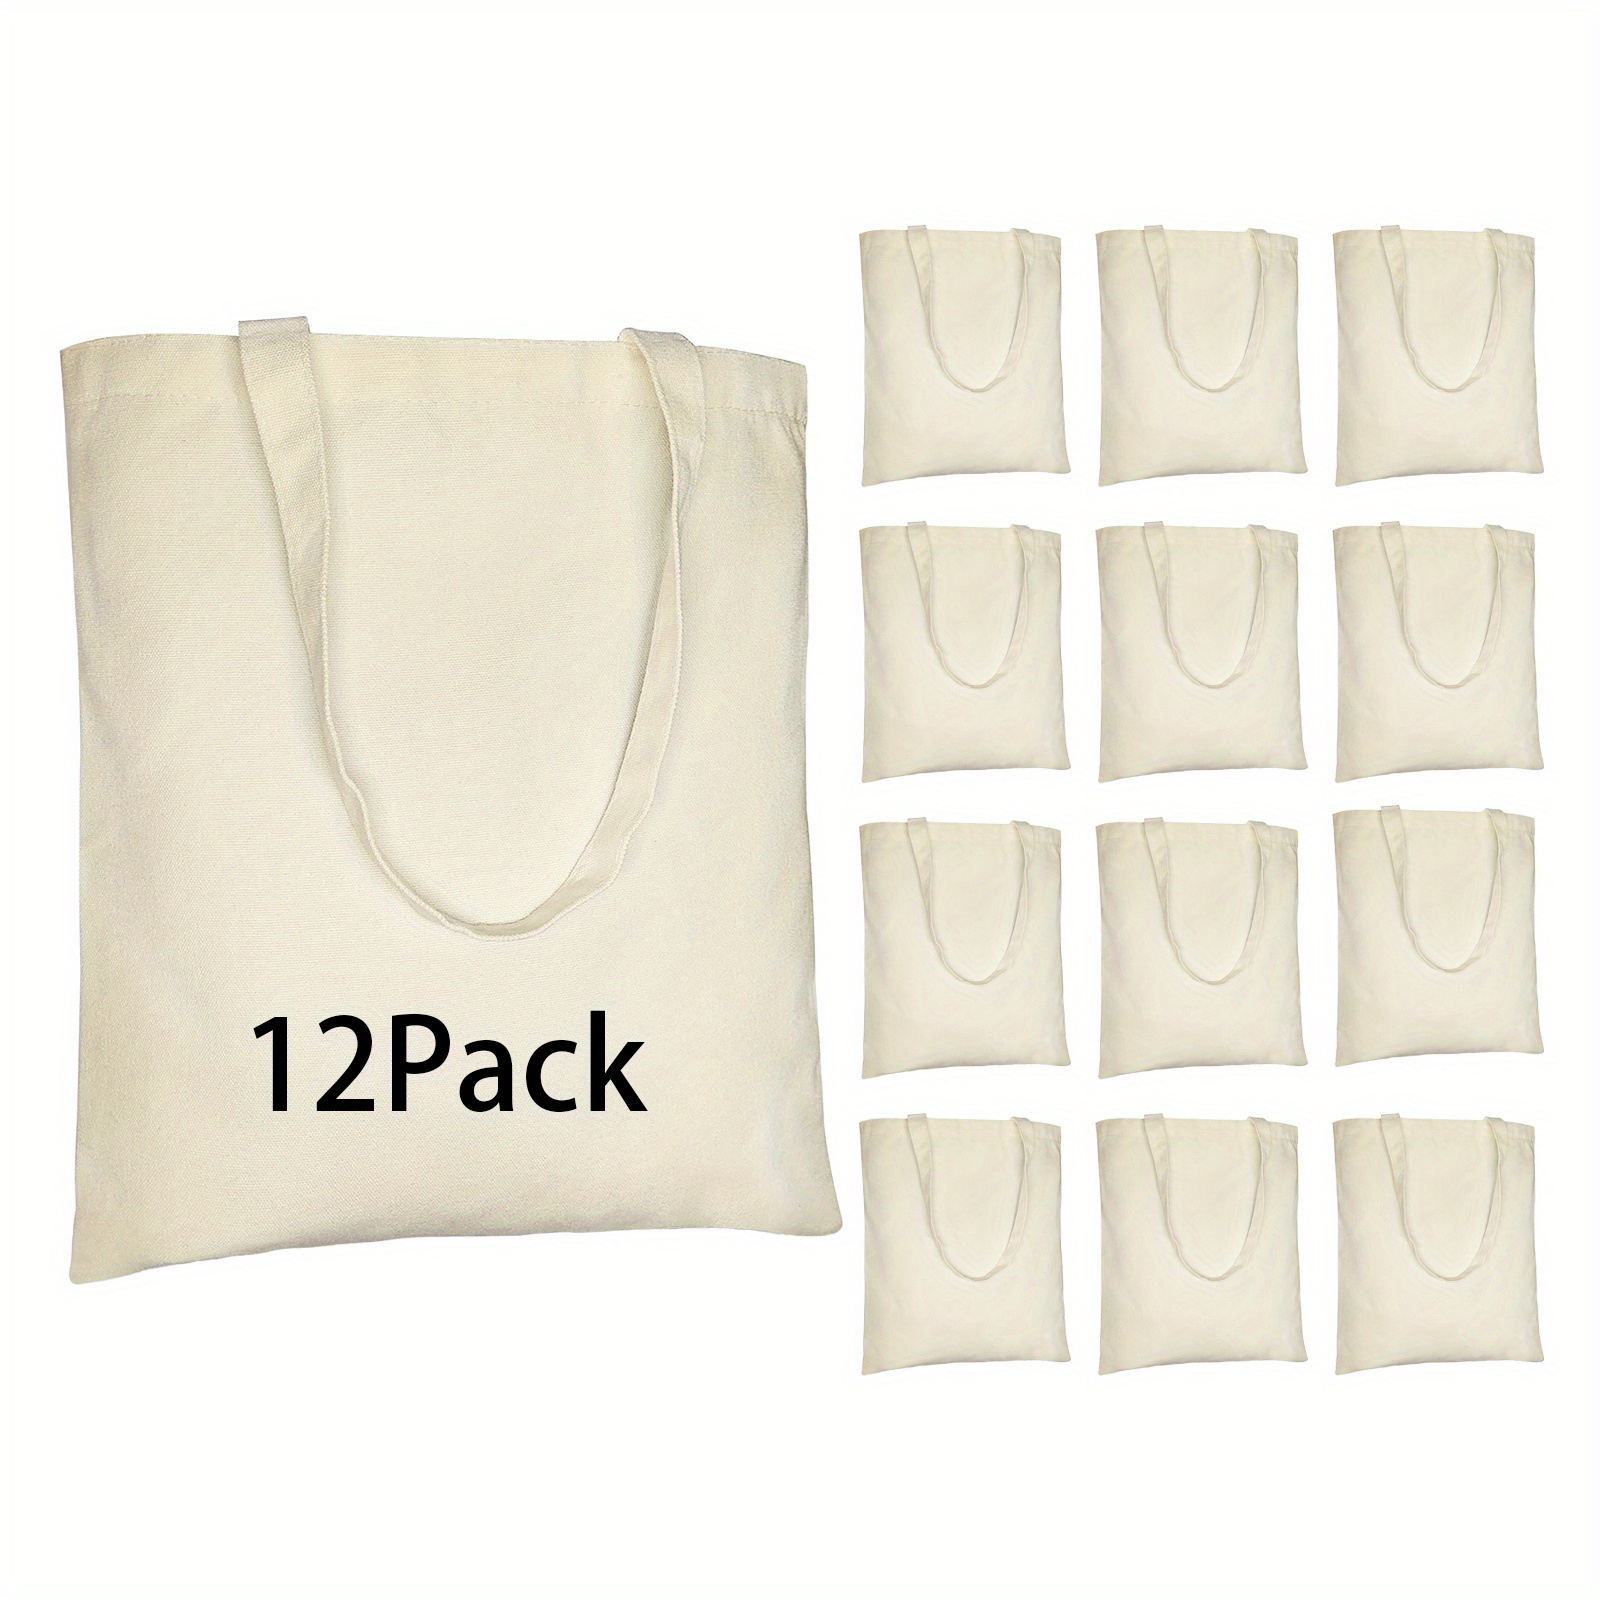 10 Pack) Reusable Cotton Canvas Blank Plain Tote Bags Shopping